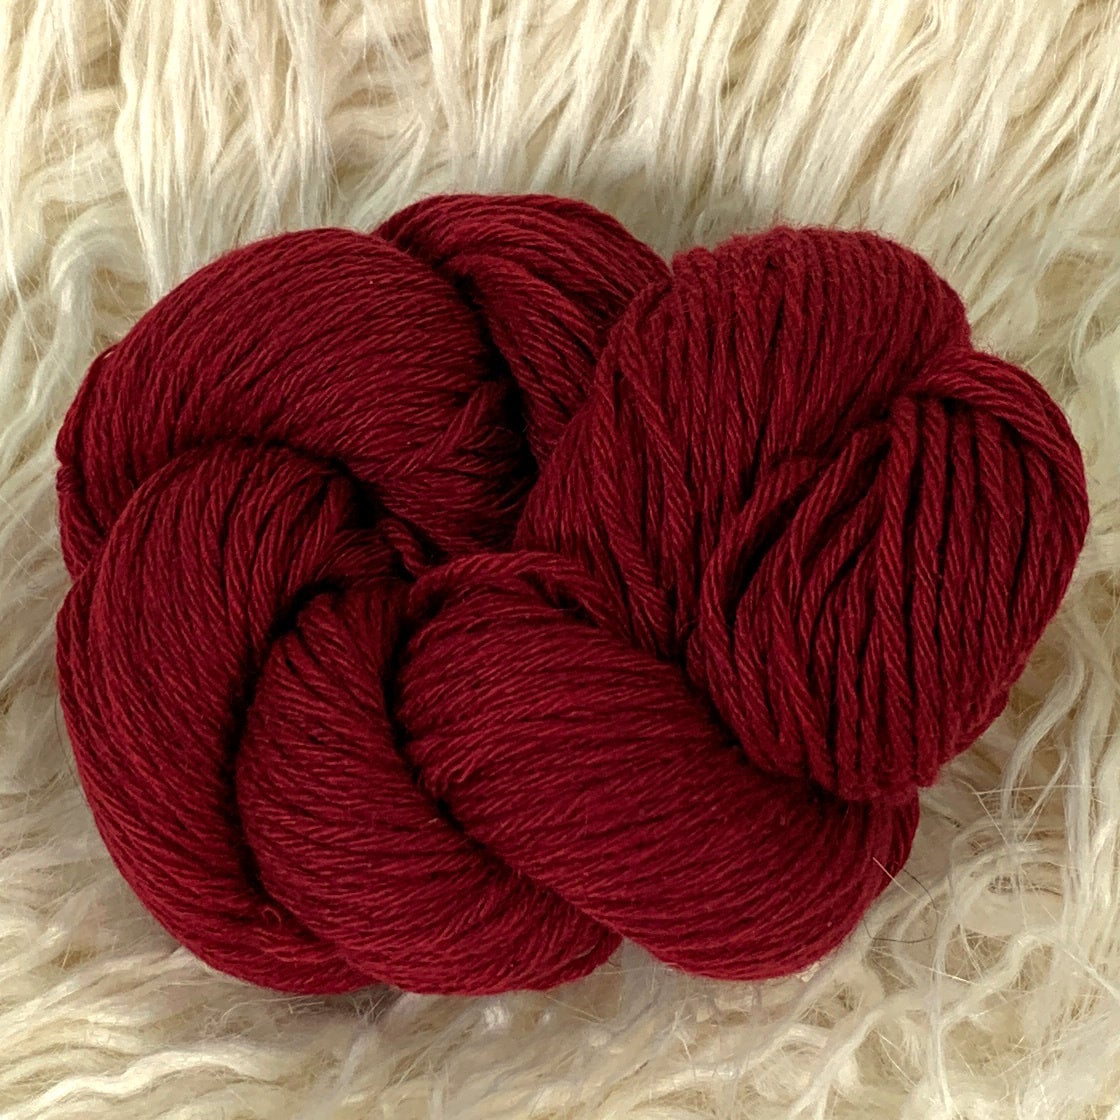 Curry DK Weight Cashmere Yarn by June Cashmere